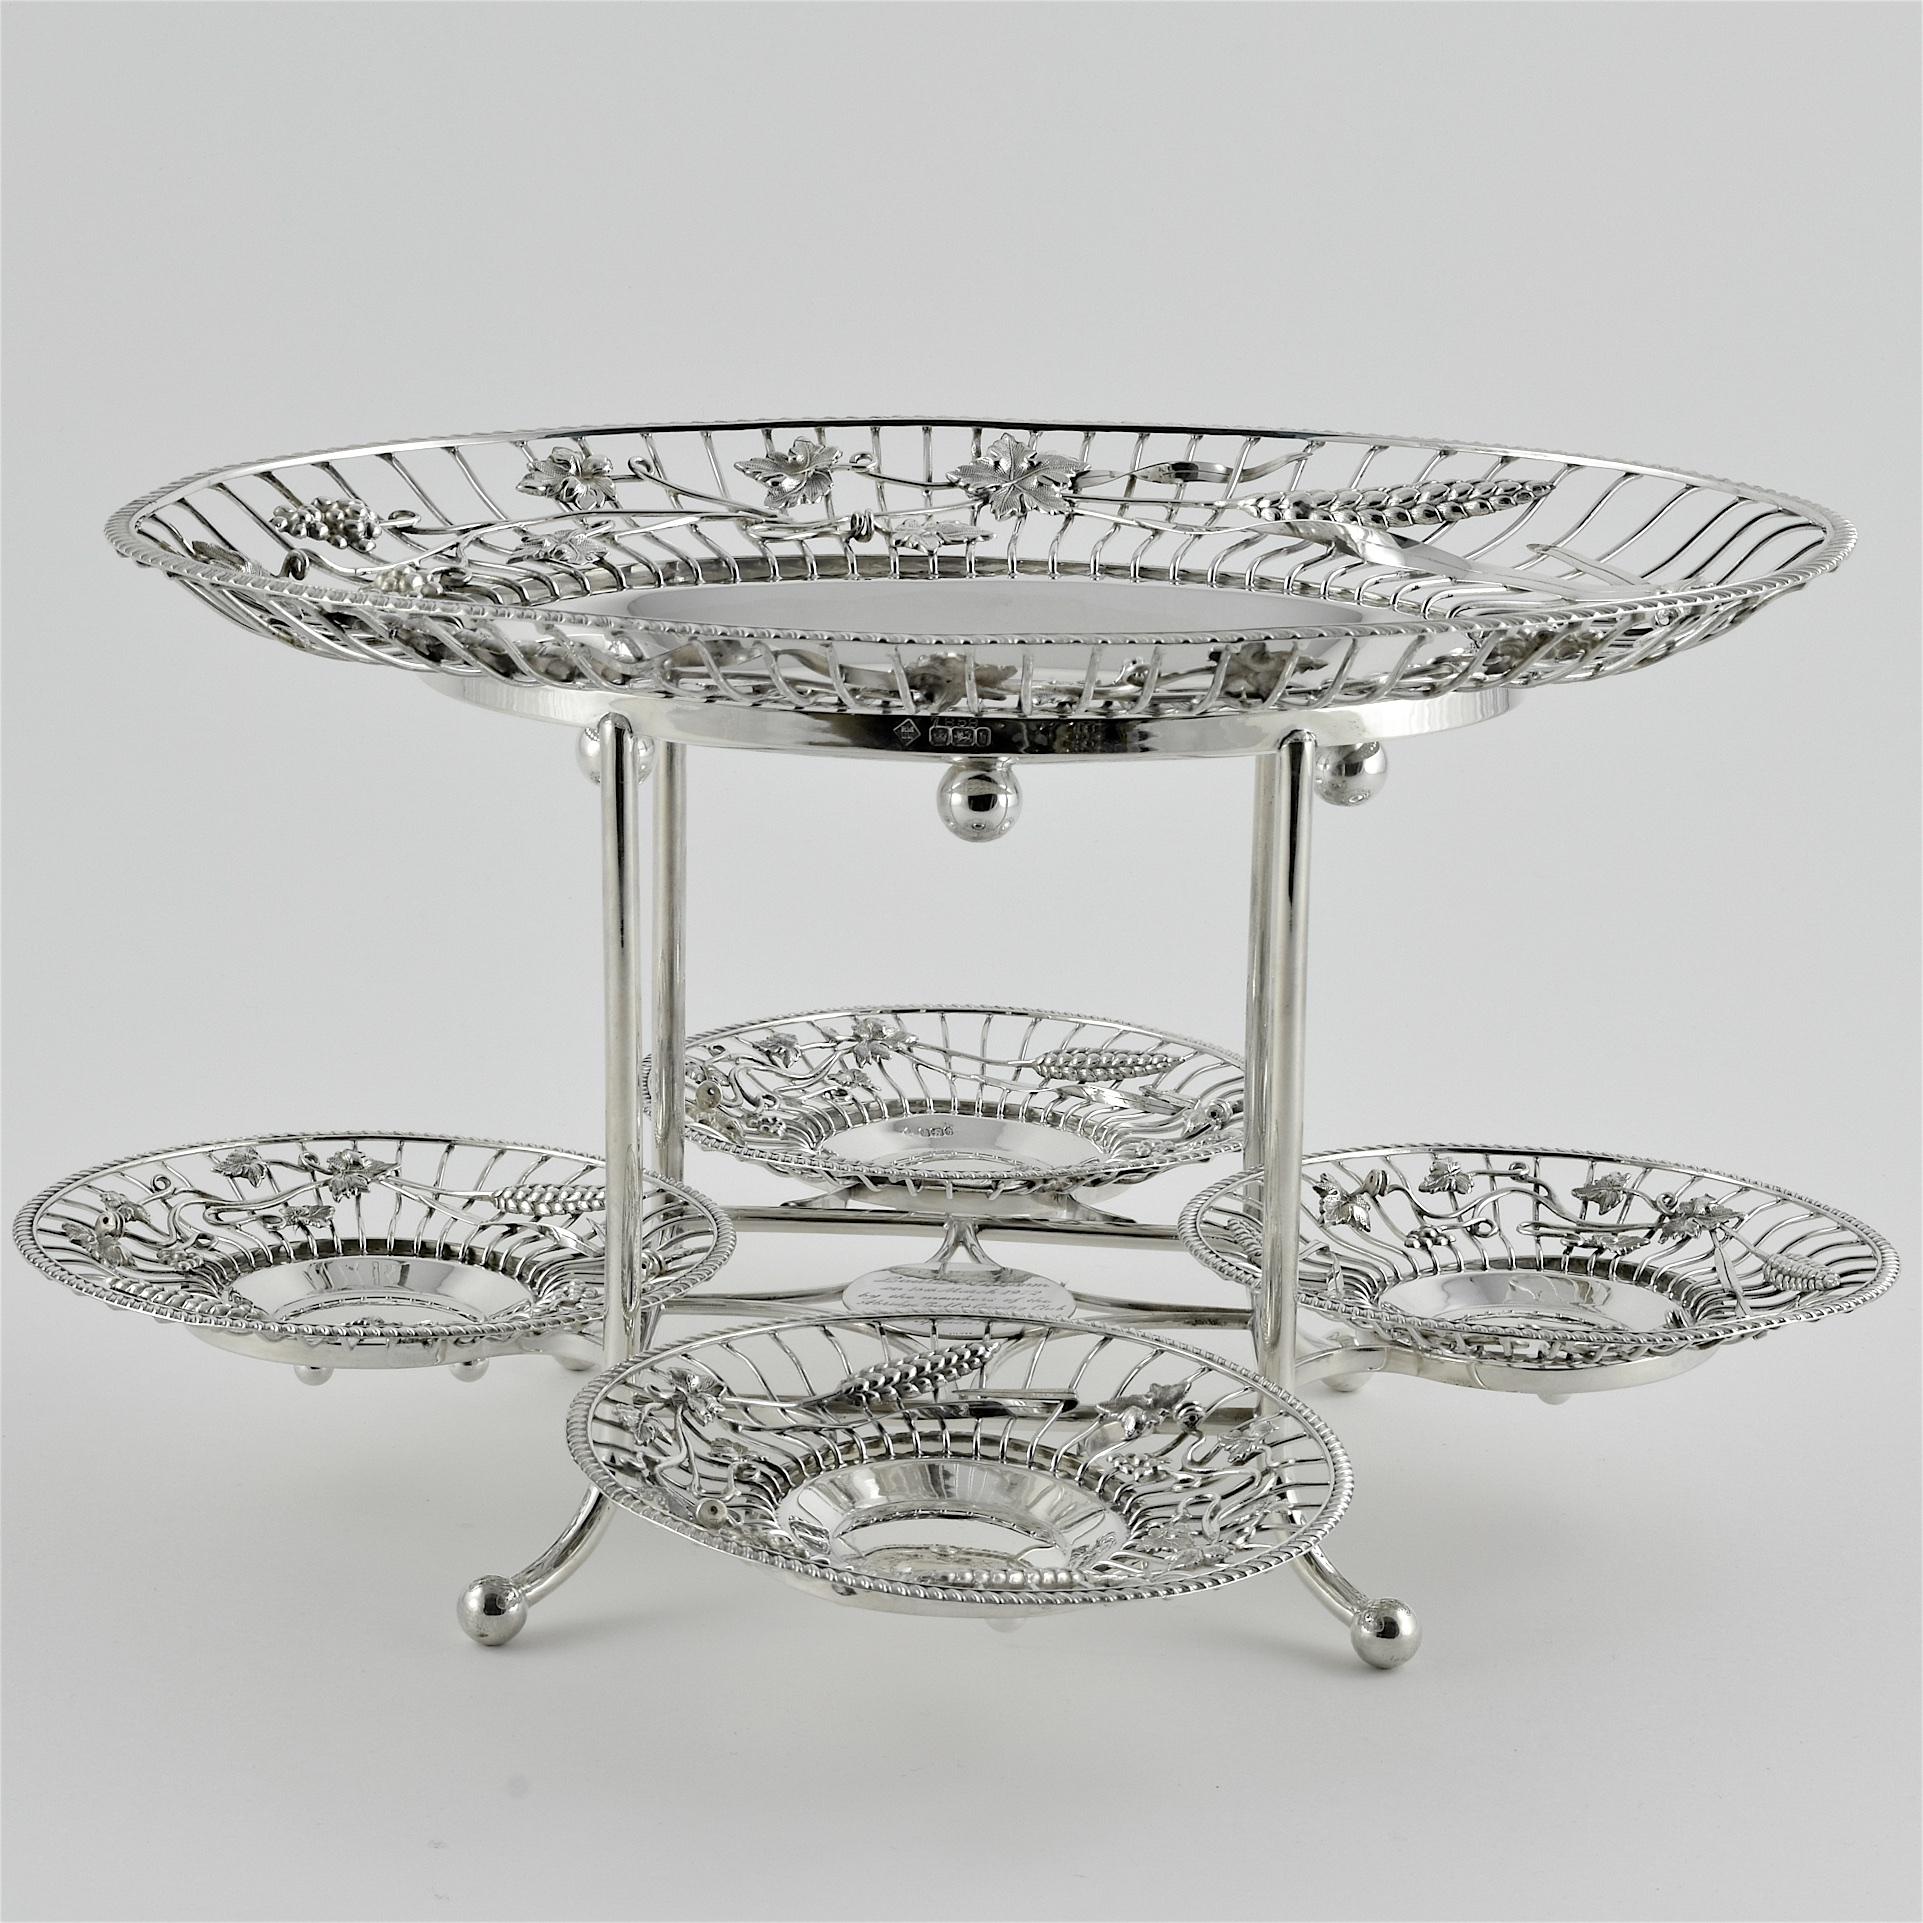 This unusual and elegant five-dish epergne, with hallmarks For Richard Martin and Ebenezer Hall would make a perfect centrepiece for the dining table for fruits or desserts, but equally for afternoon tea with cakes, Scones and sandwiches in the